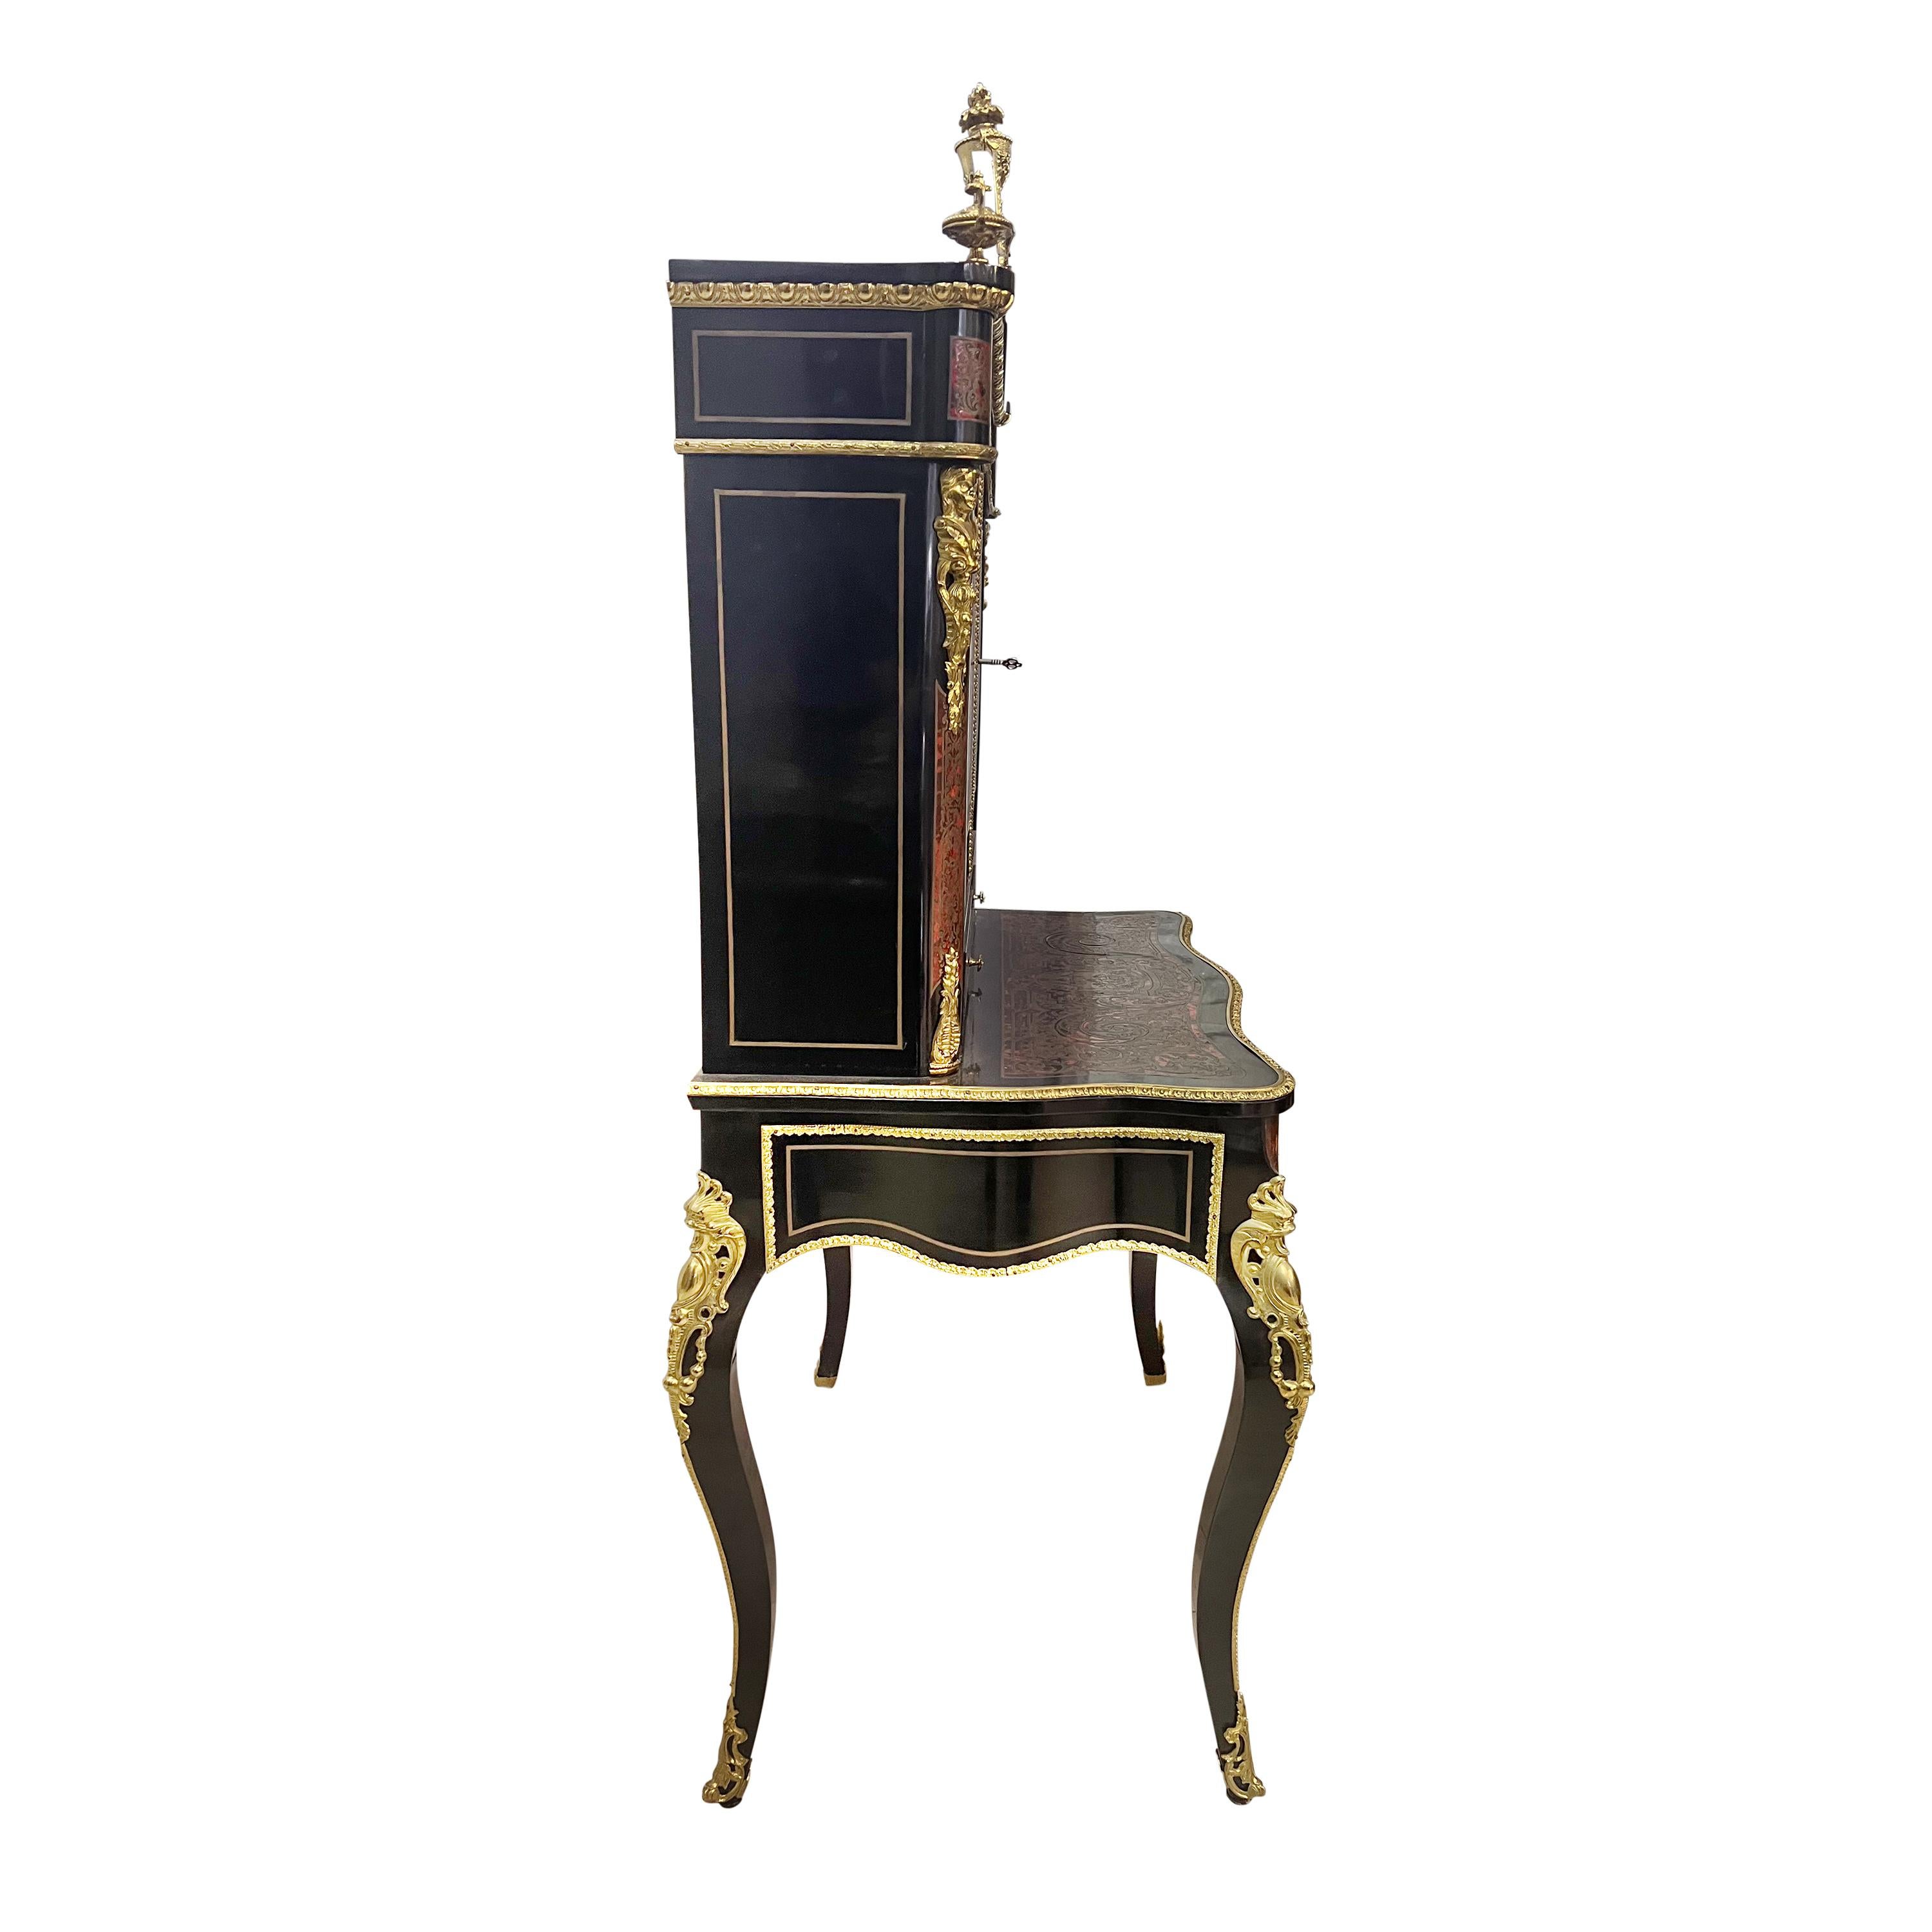 19th Century French Louis XV Style Ormolu Mounted Boulle Secretary Desk  For Sale 2